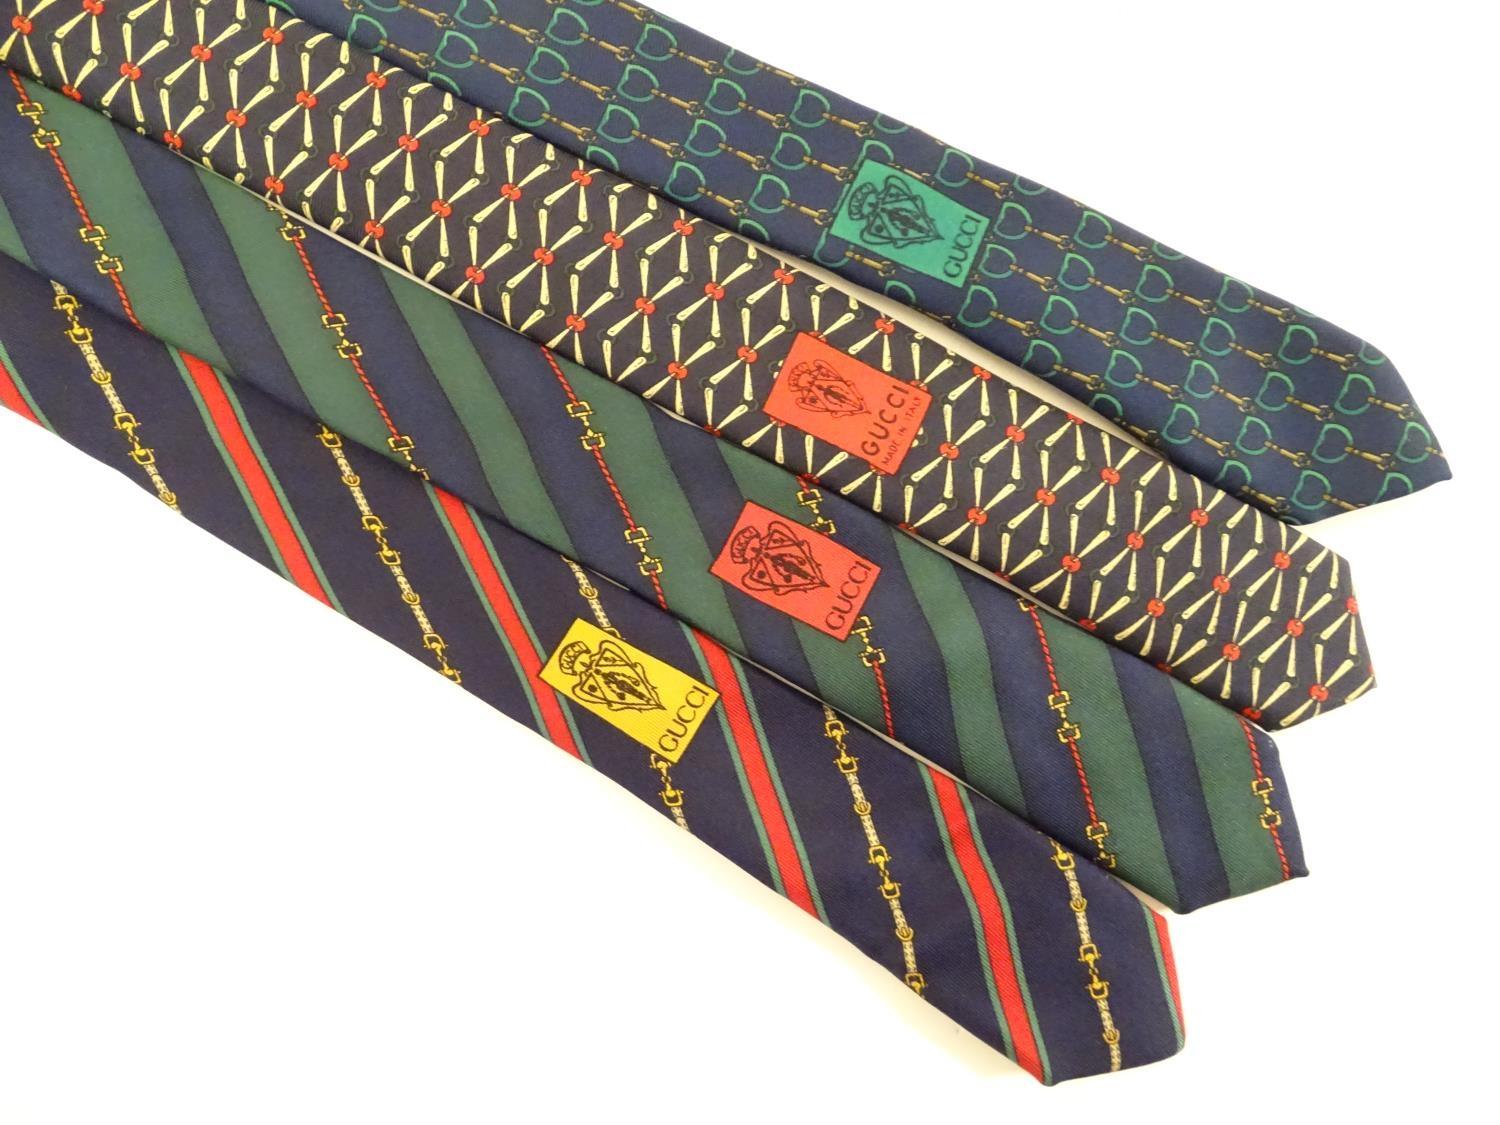 4 Gucci silk ties, various designs in greens, black and blues (4) Please Note - we do not make - Image 7 of 7